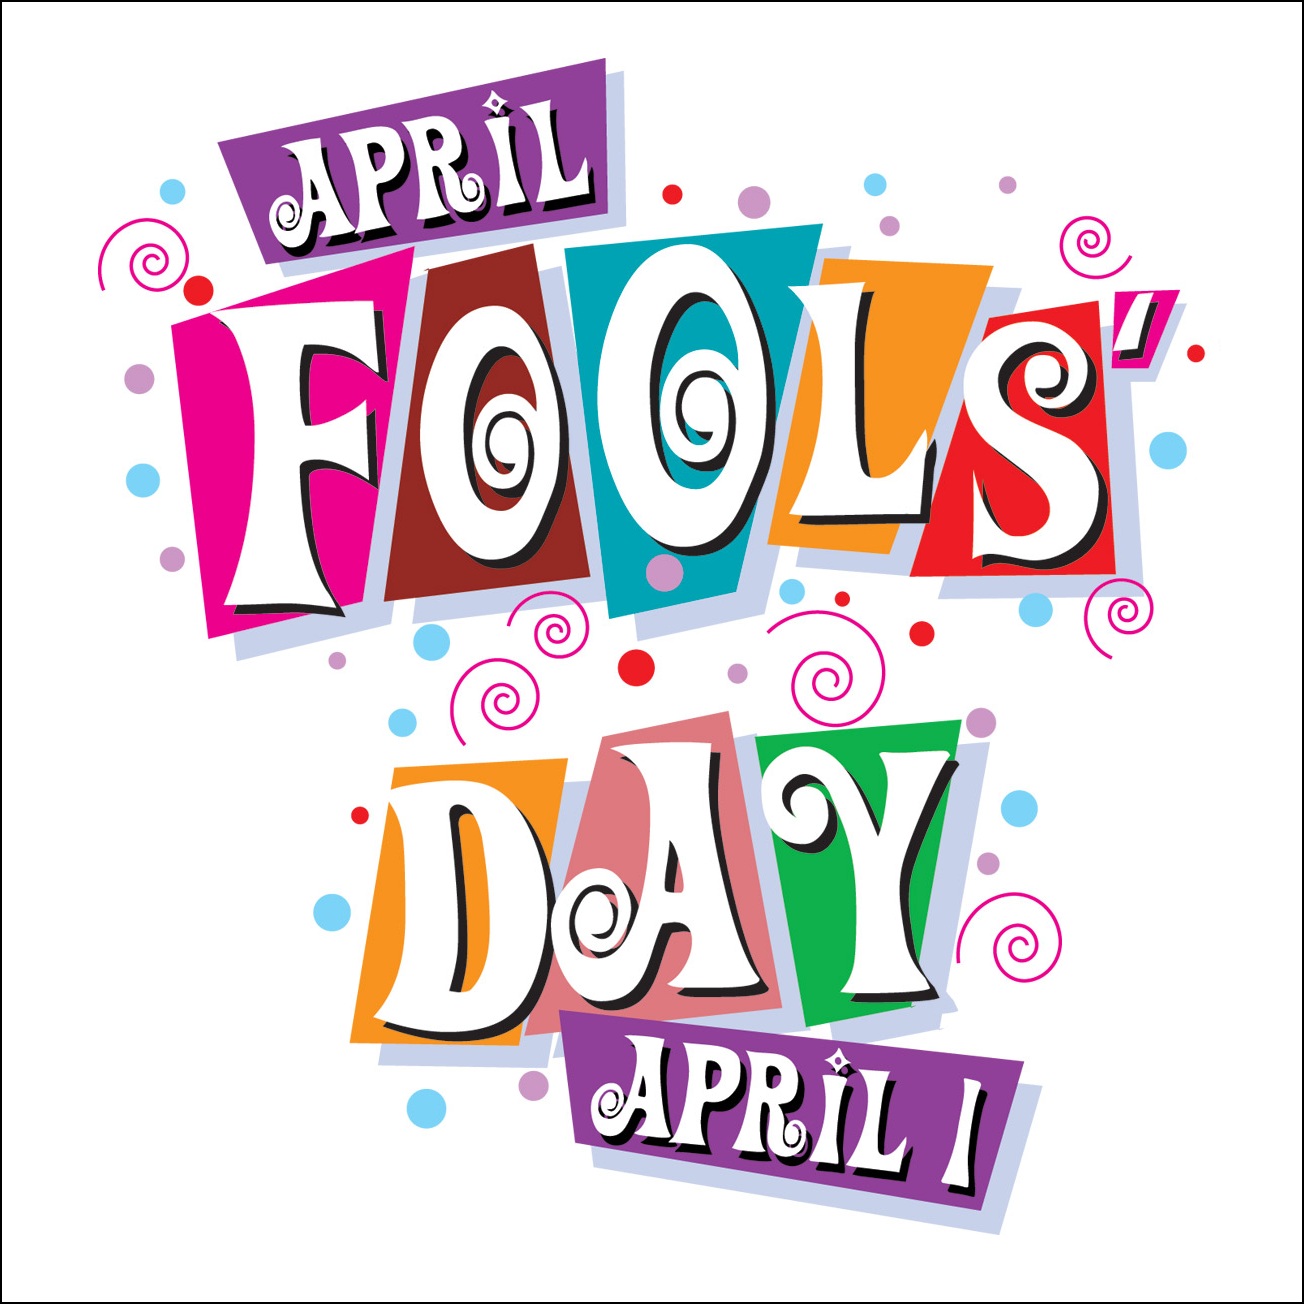 April Fool Jokes, SMS, Messages, Pranks, SMS In Hindi ~ ViewsTweets